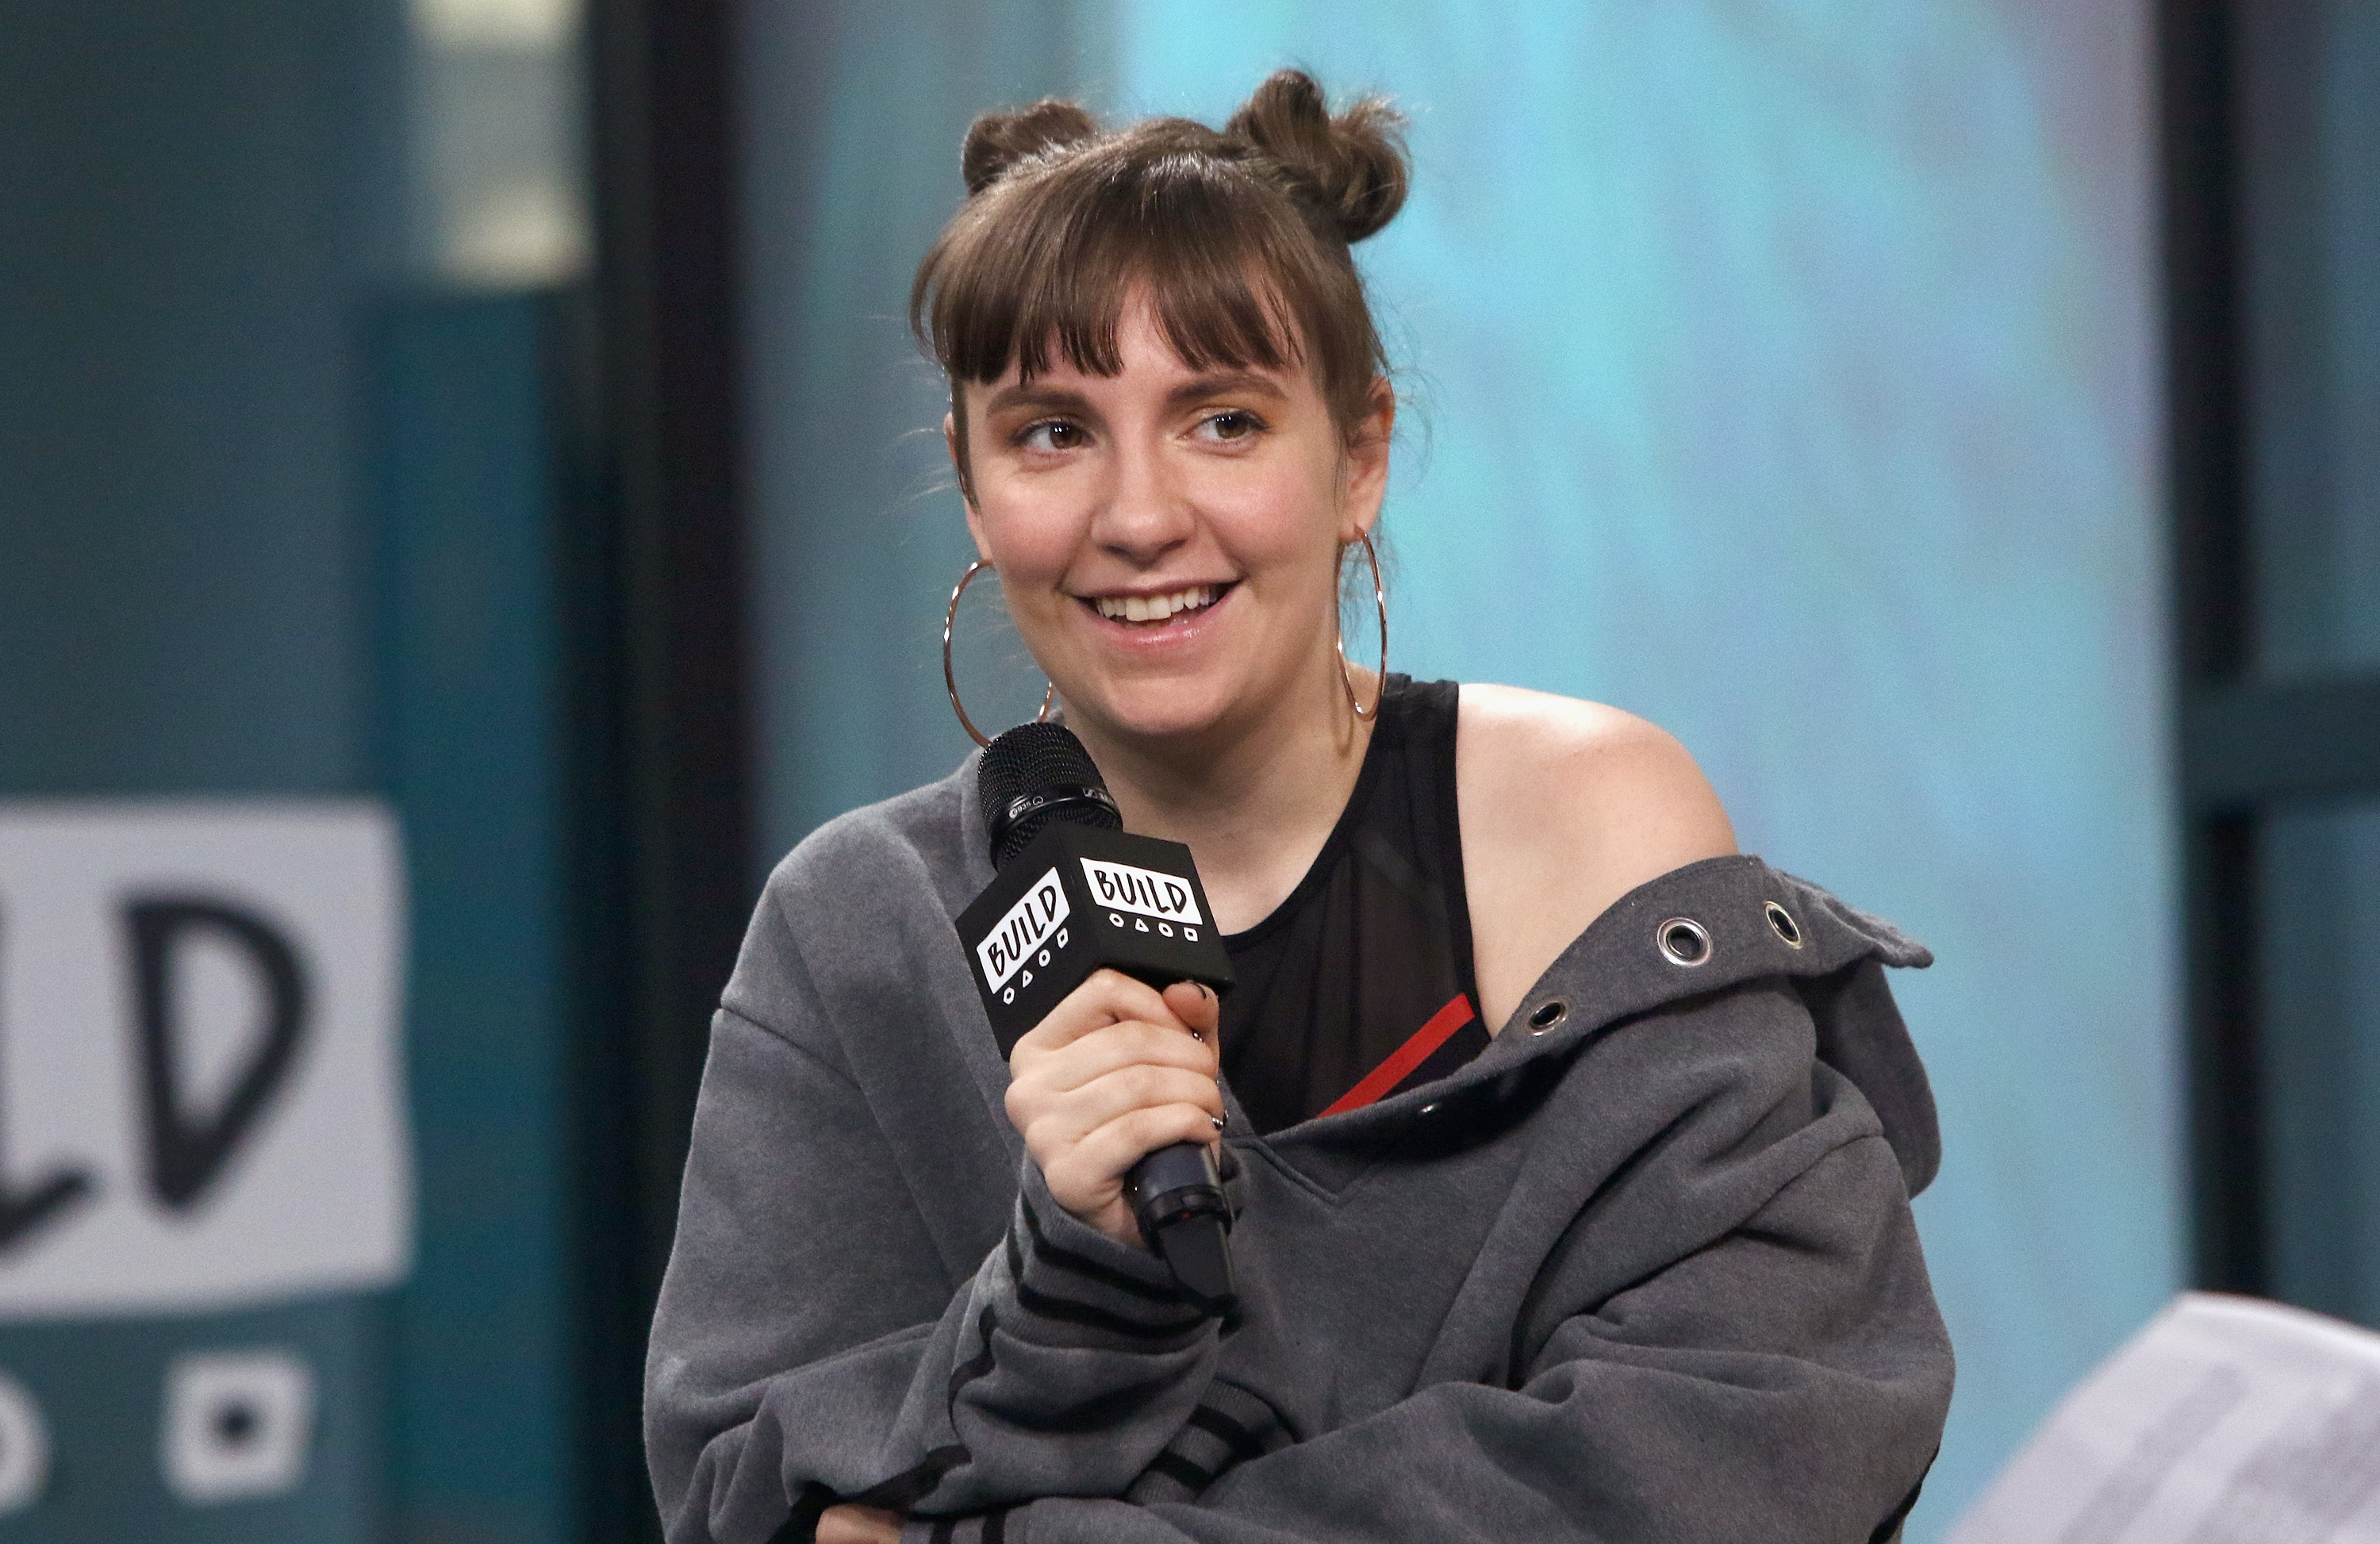 Lena Dunham wearing a casual outfit, with her hair in two buns, speaking into a microphone at a BUILD Series event